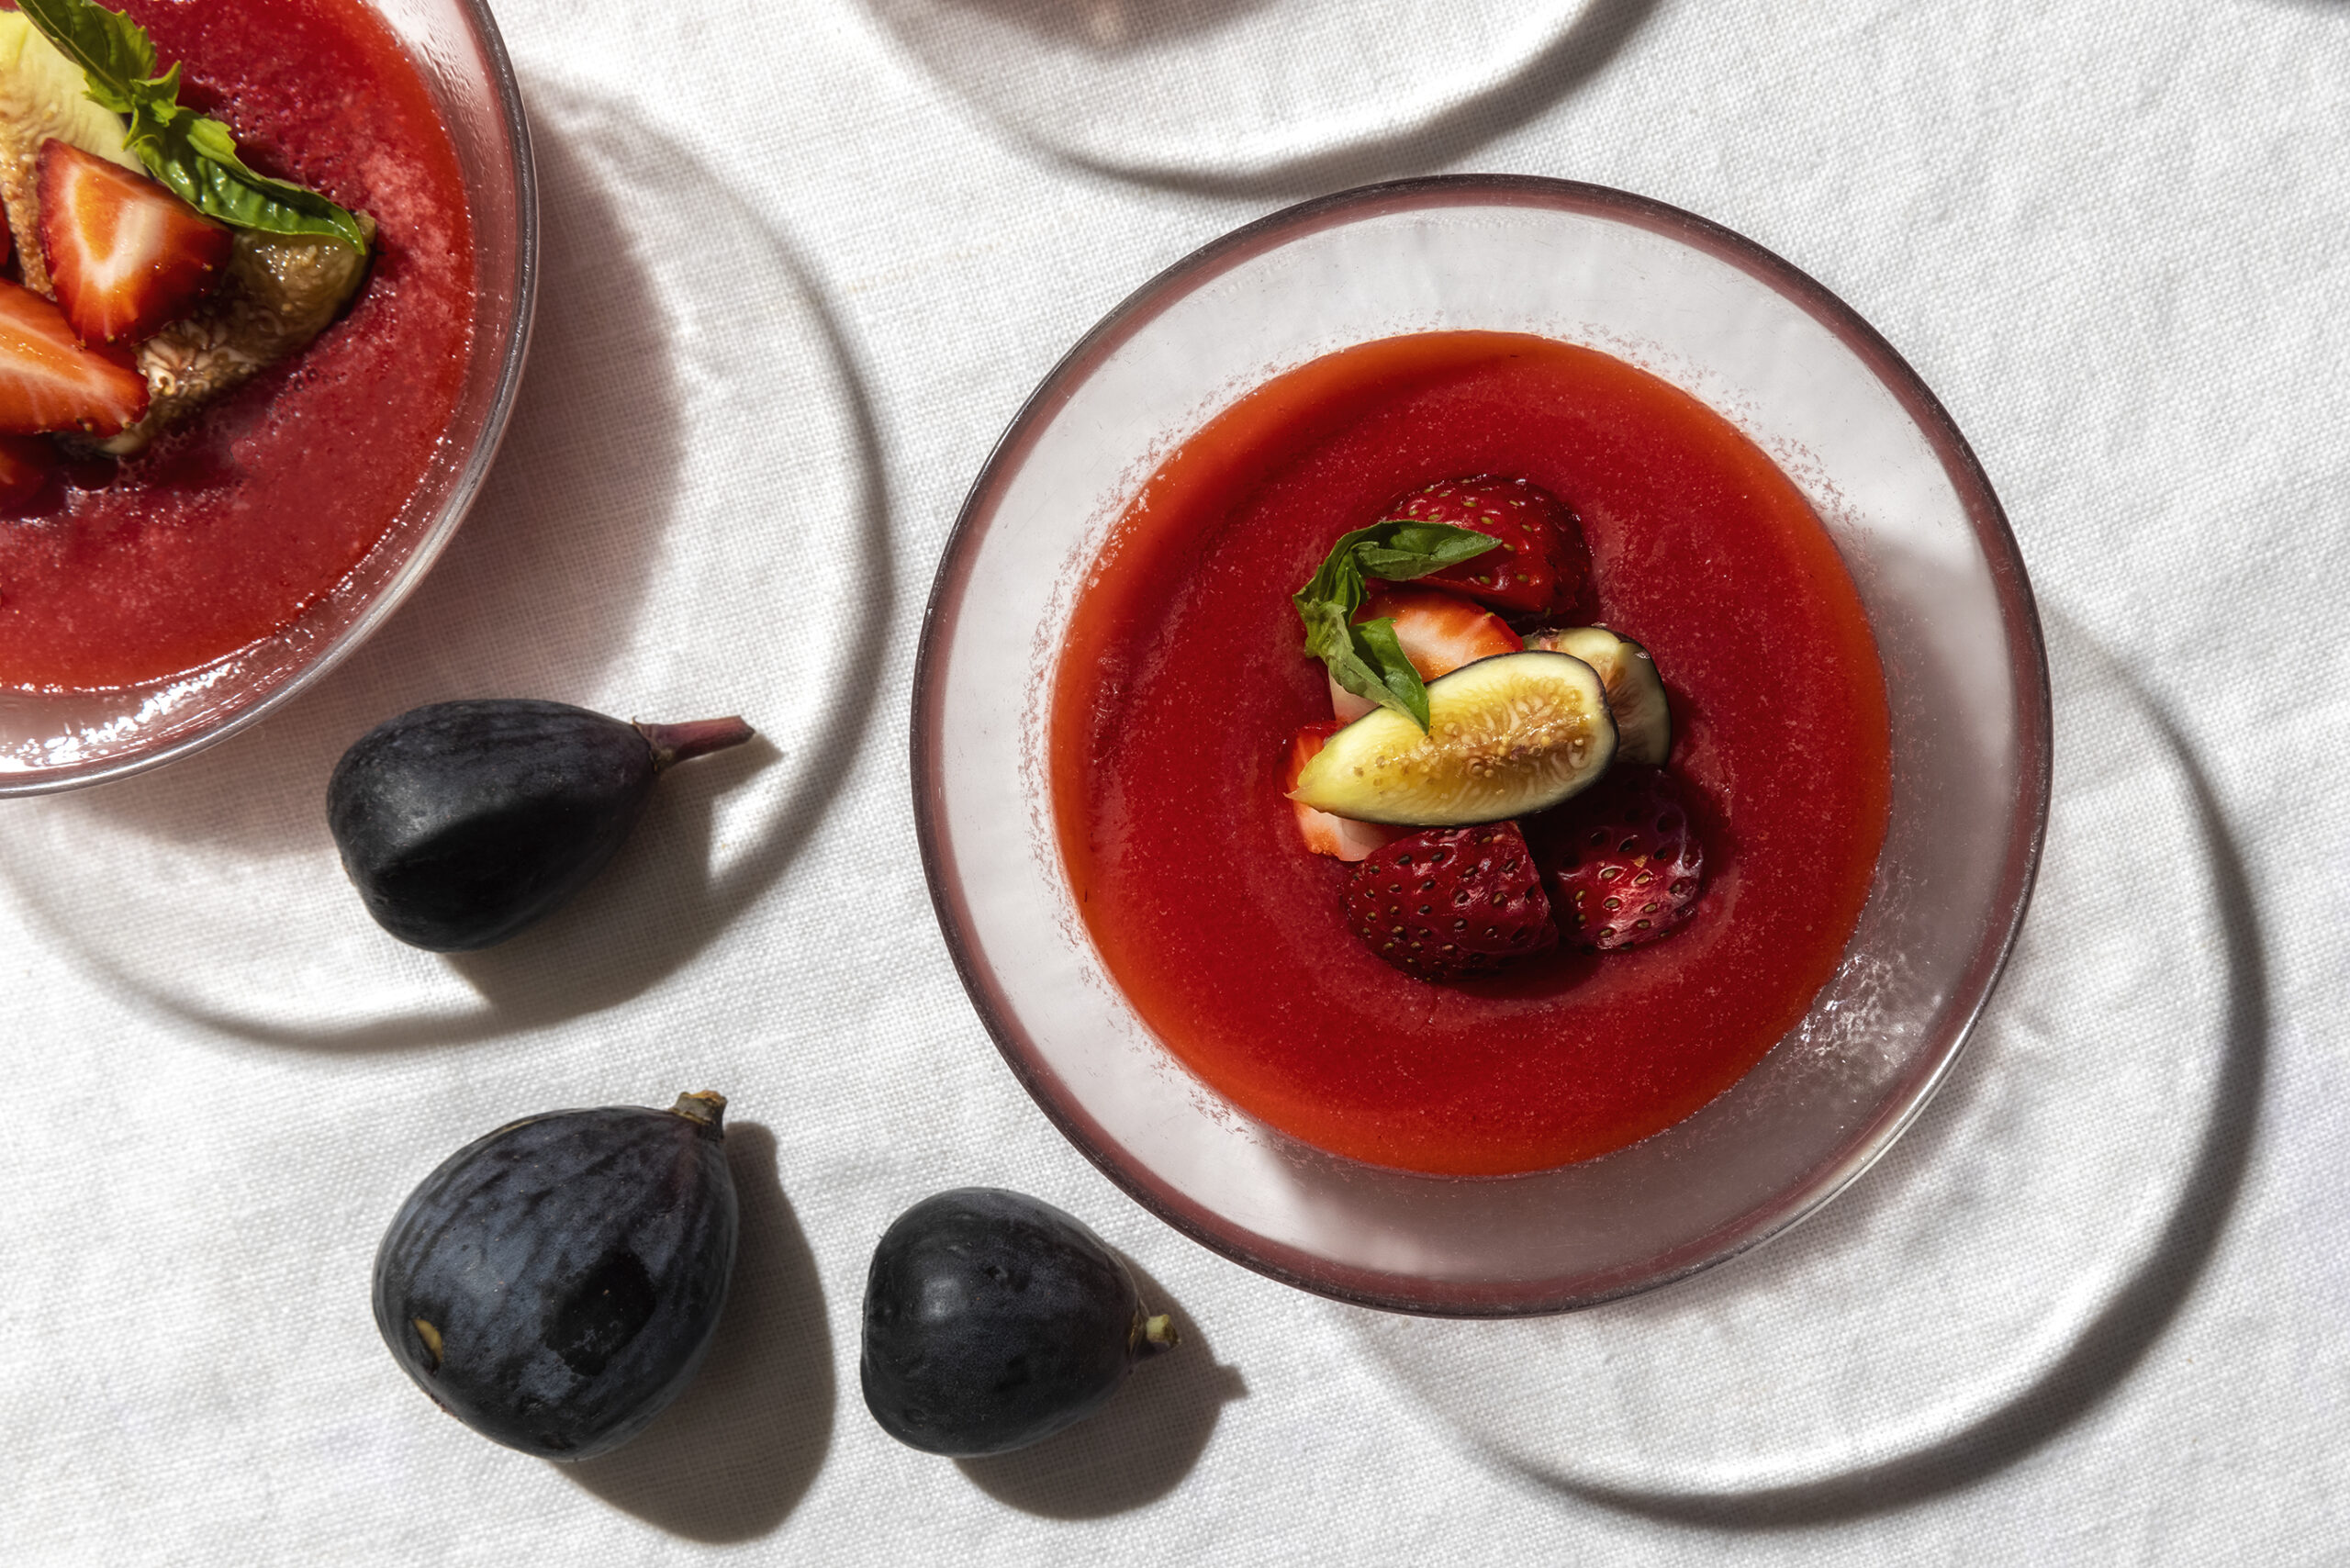 Fruit Soup with Figs and Strawberry Garnish